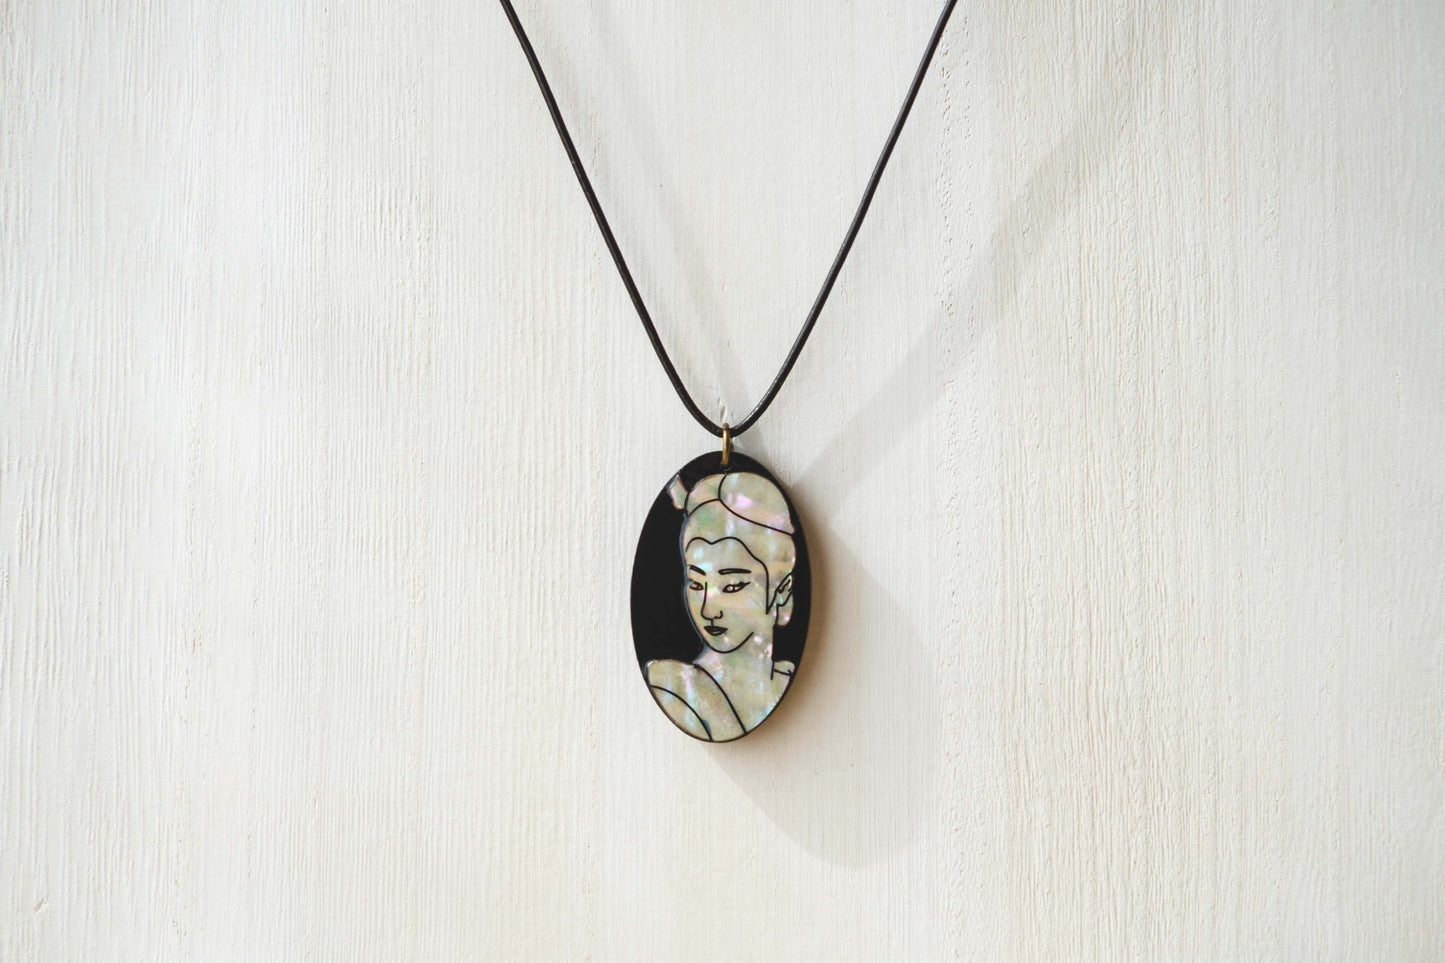 Mother of pearl necklace with engraved portrait of woman. 